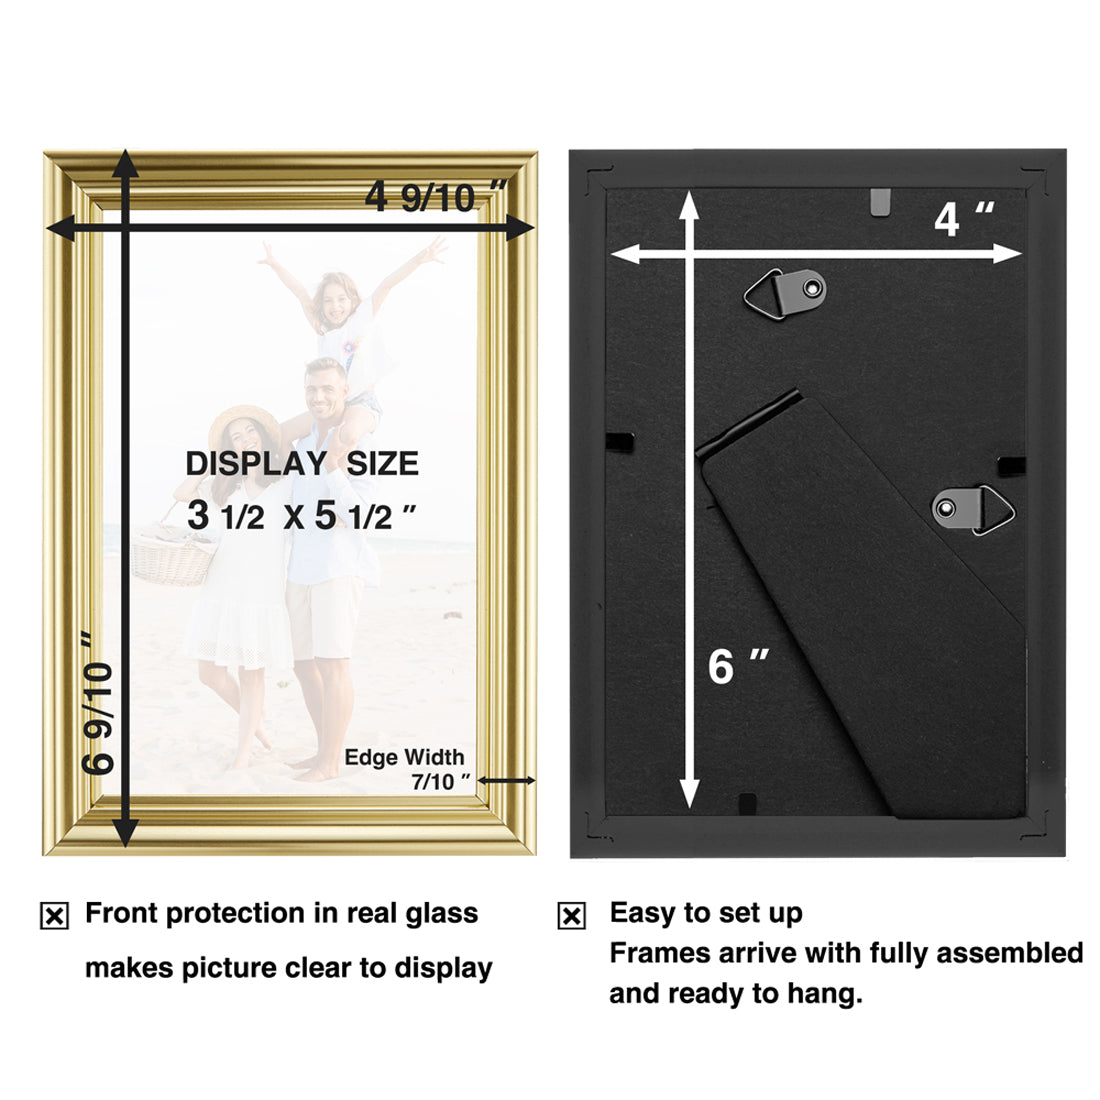 Lavie Home 5x7 Picture Frames (6 Pack, Gold) Simple Designed Photo Frame with High Definition Glass for Wall Mount & Table Top Display, Set of 6